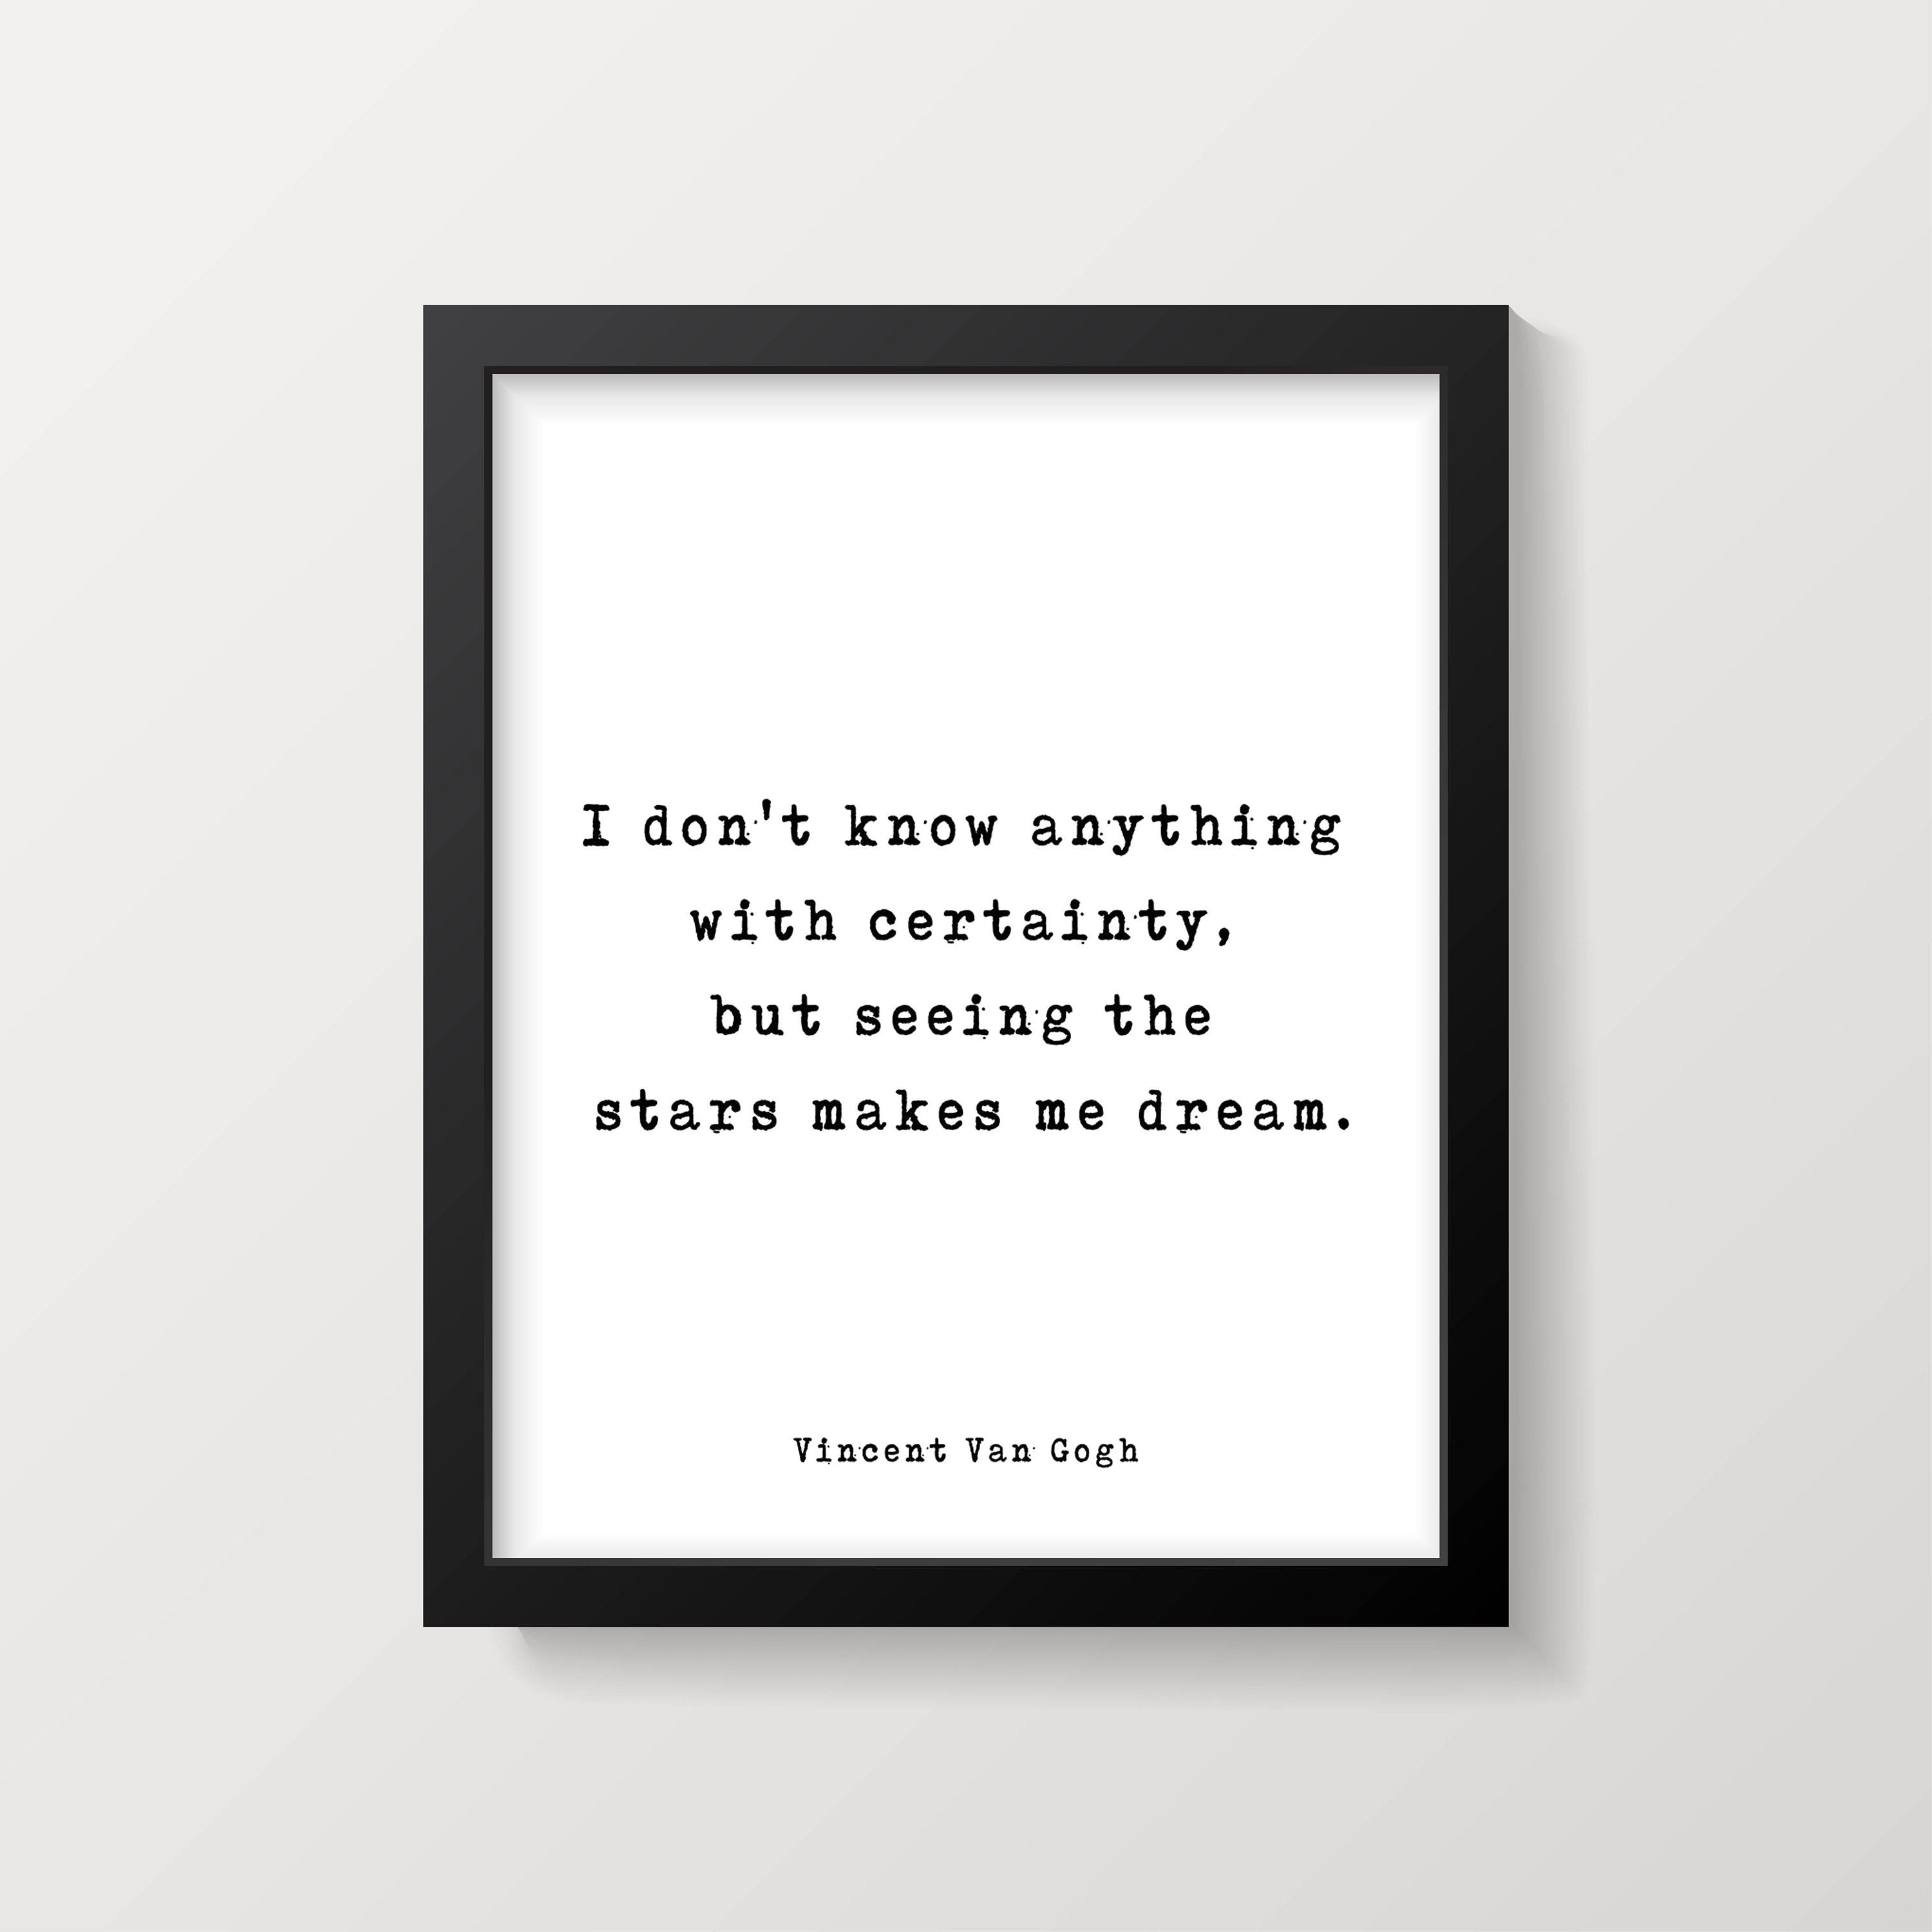 Vincent van Gogh Quote Print, I don't know anything with certainty, Inspirational Wall Art print, Black and White print, Home Decor Unframed - BookQuoteDecor